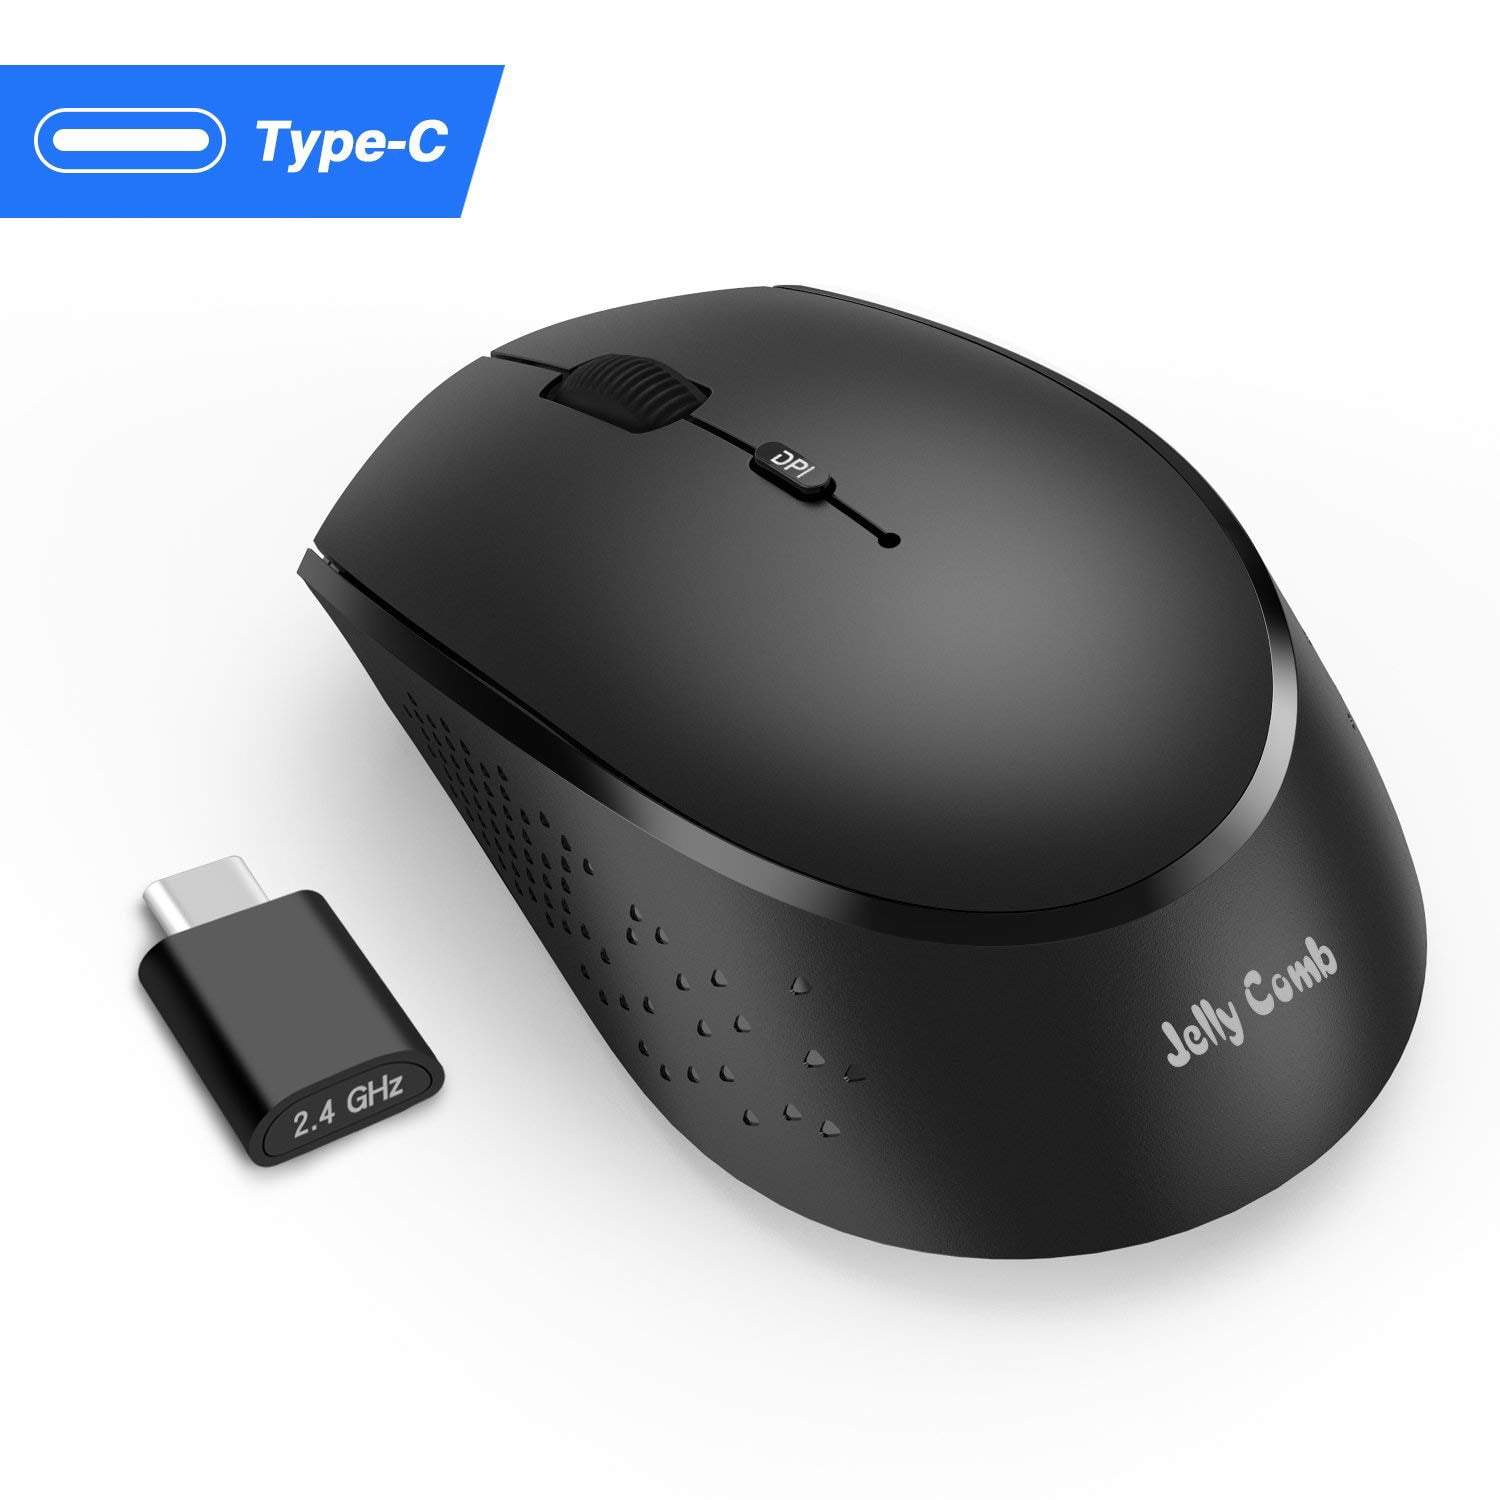 Type C Wireless Mouse, Jelly Comb 2.4GHz Rechargeable USB C Mouse Compatible for 12", MacBook Pro 2016/2017, Chromebook and More USB C Devices (Black) - Walmart.com